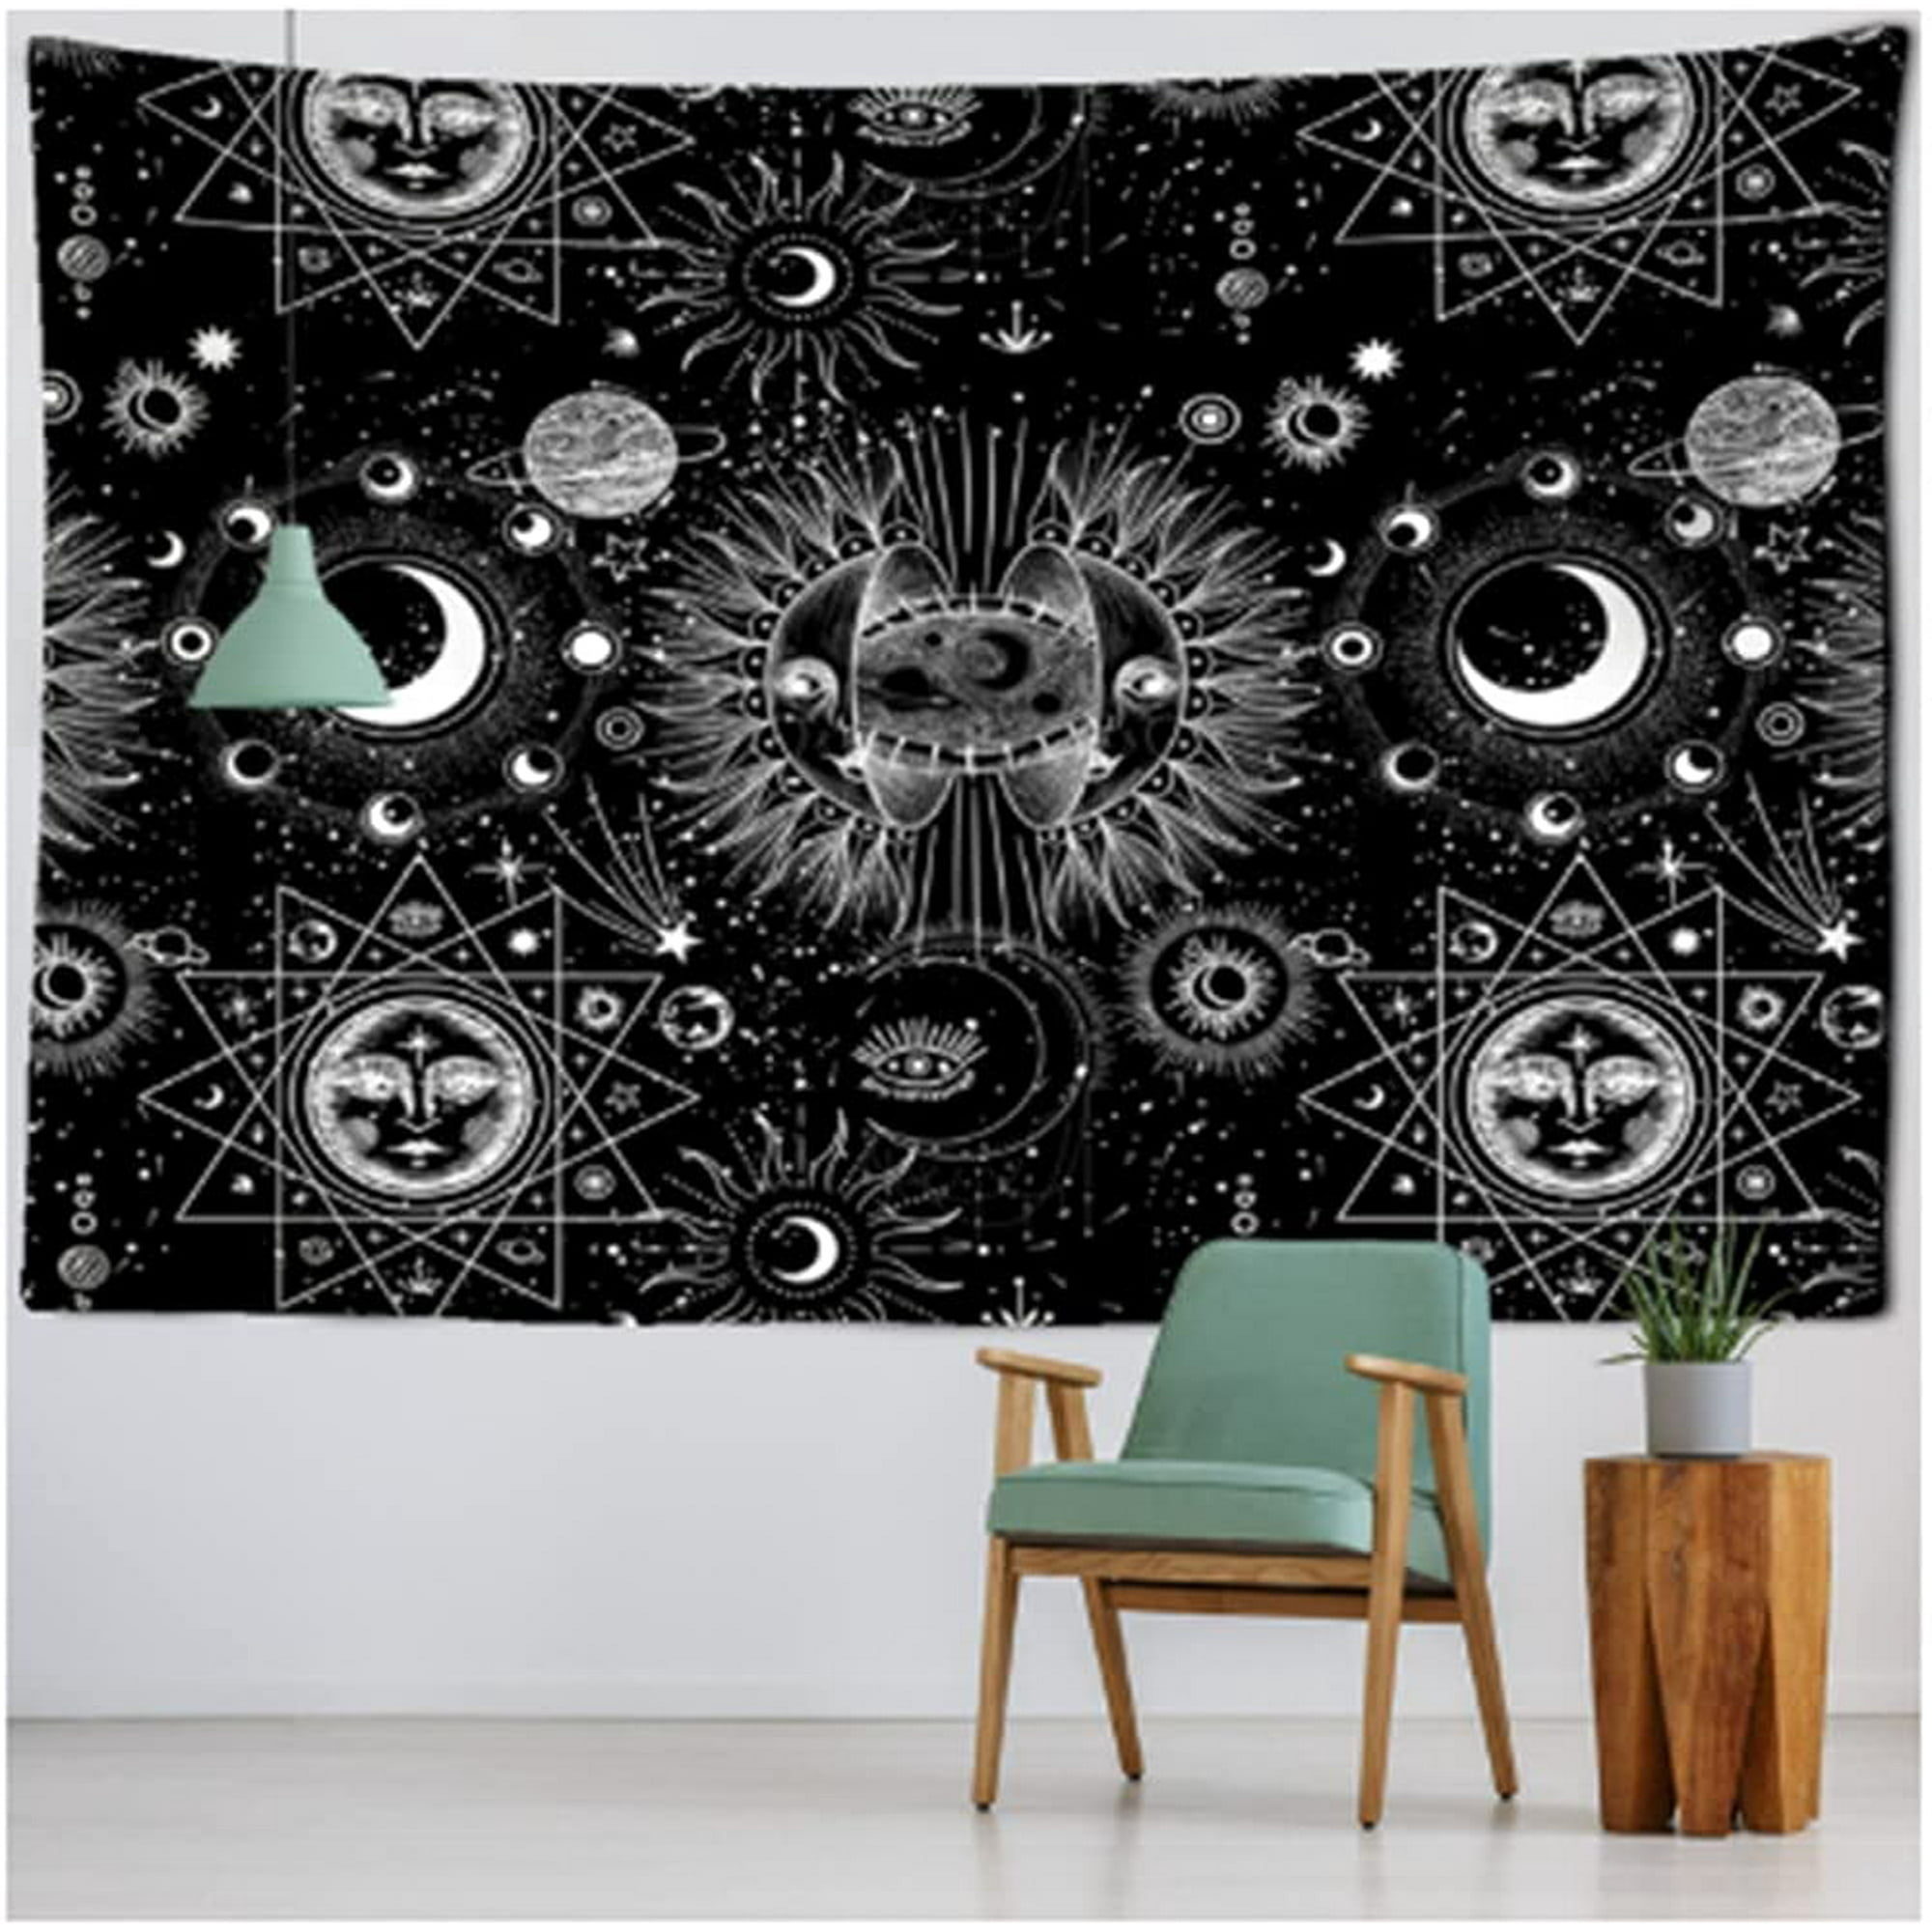 White Black Sun Moon Starry Sky Wall Hanging Bohemian Gypsy Psychedelic  Tapiz Witchcraft Astrology 95*70cm A010 | Walmart Canada